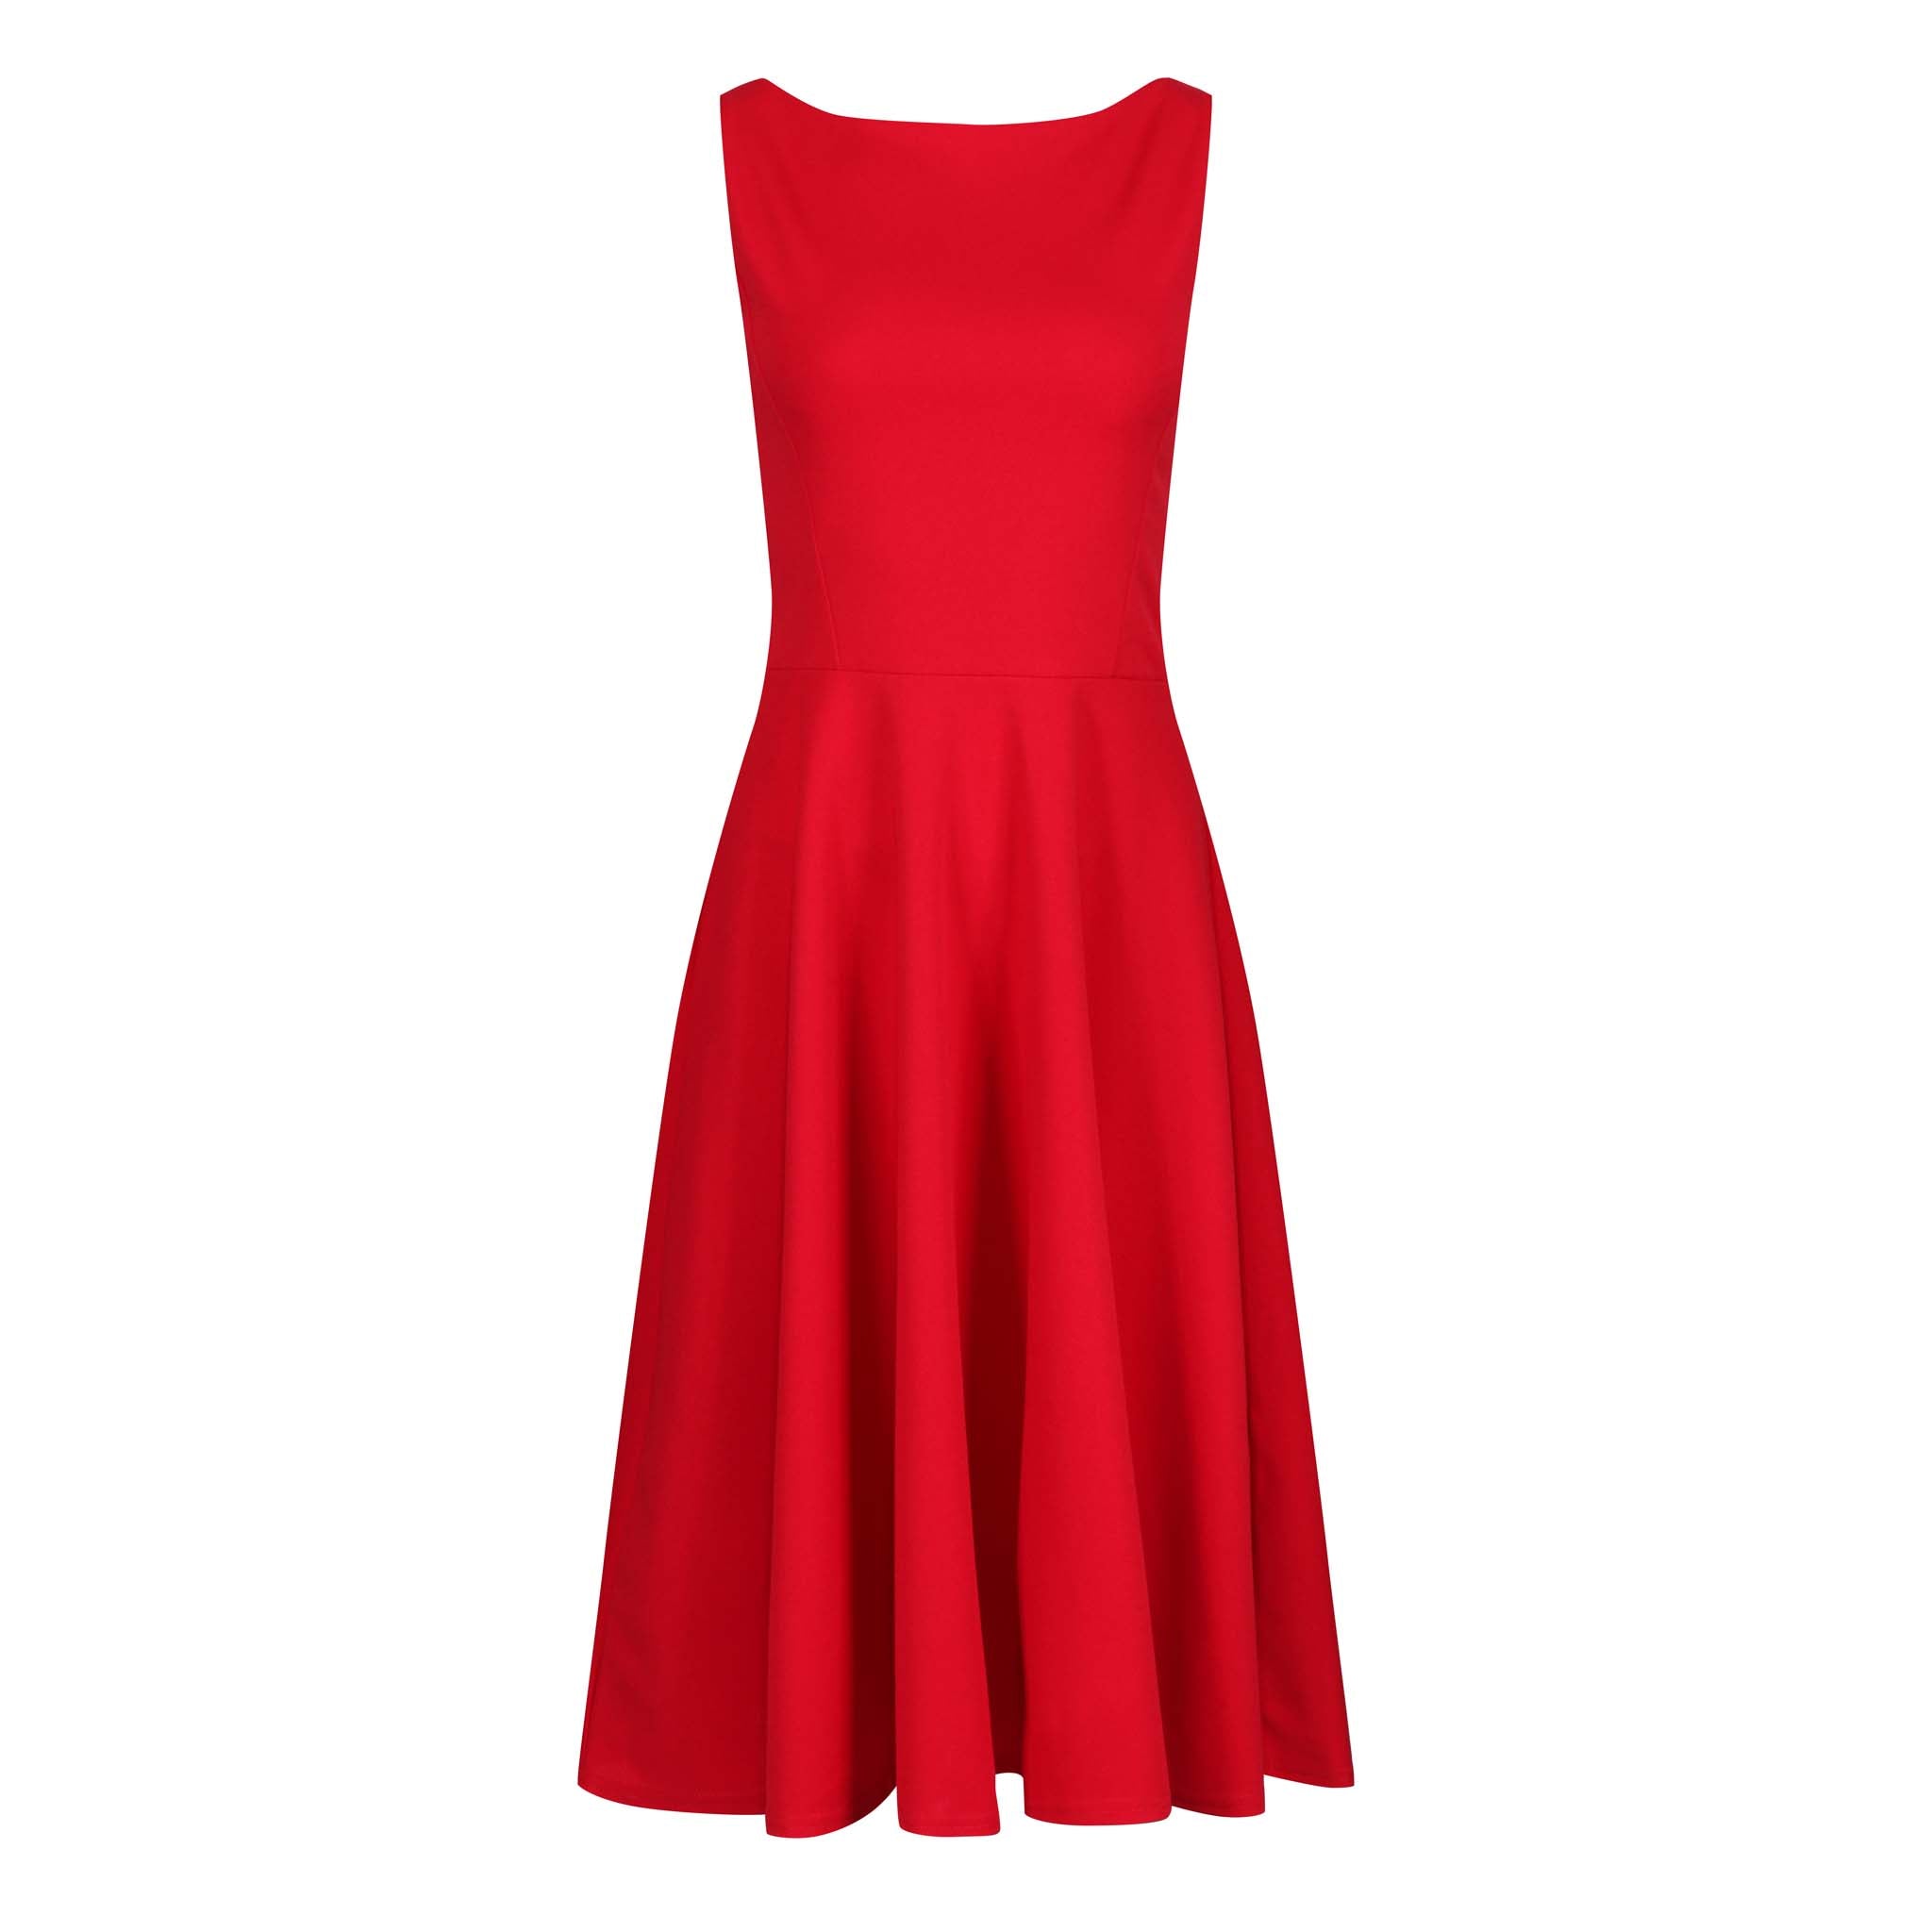 Red Audrey Style 1950s Swing Dress